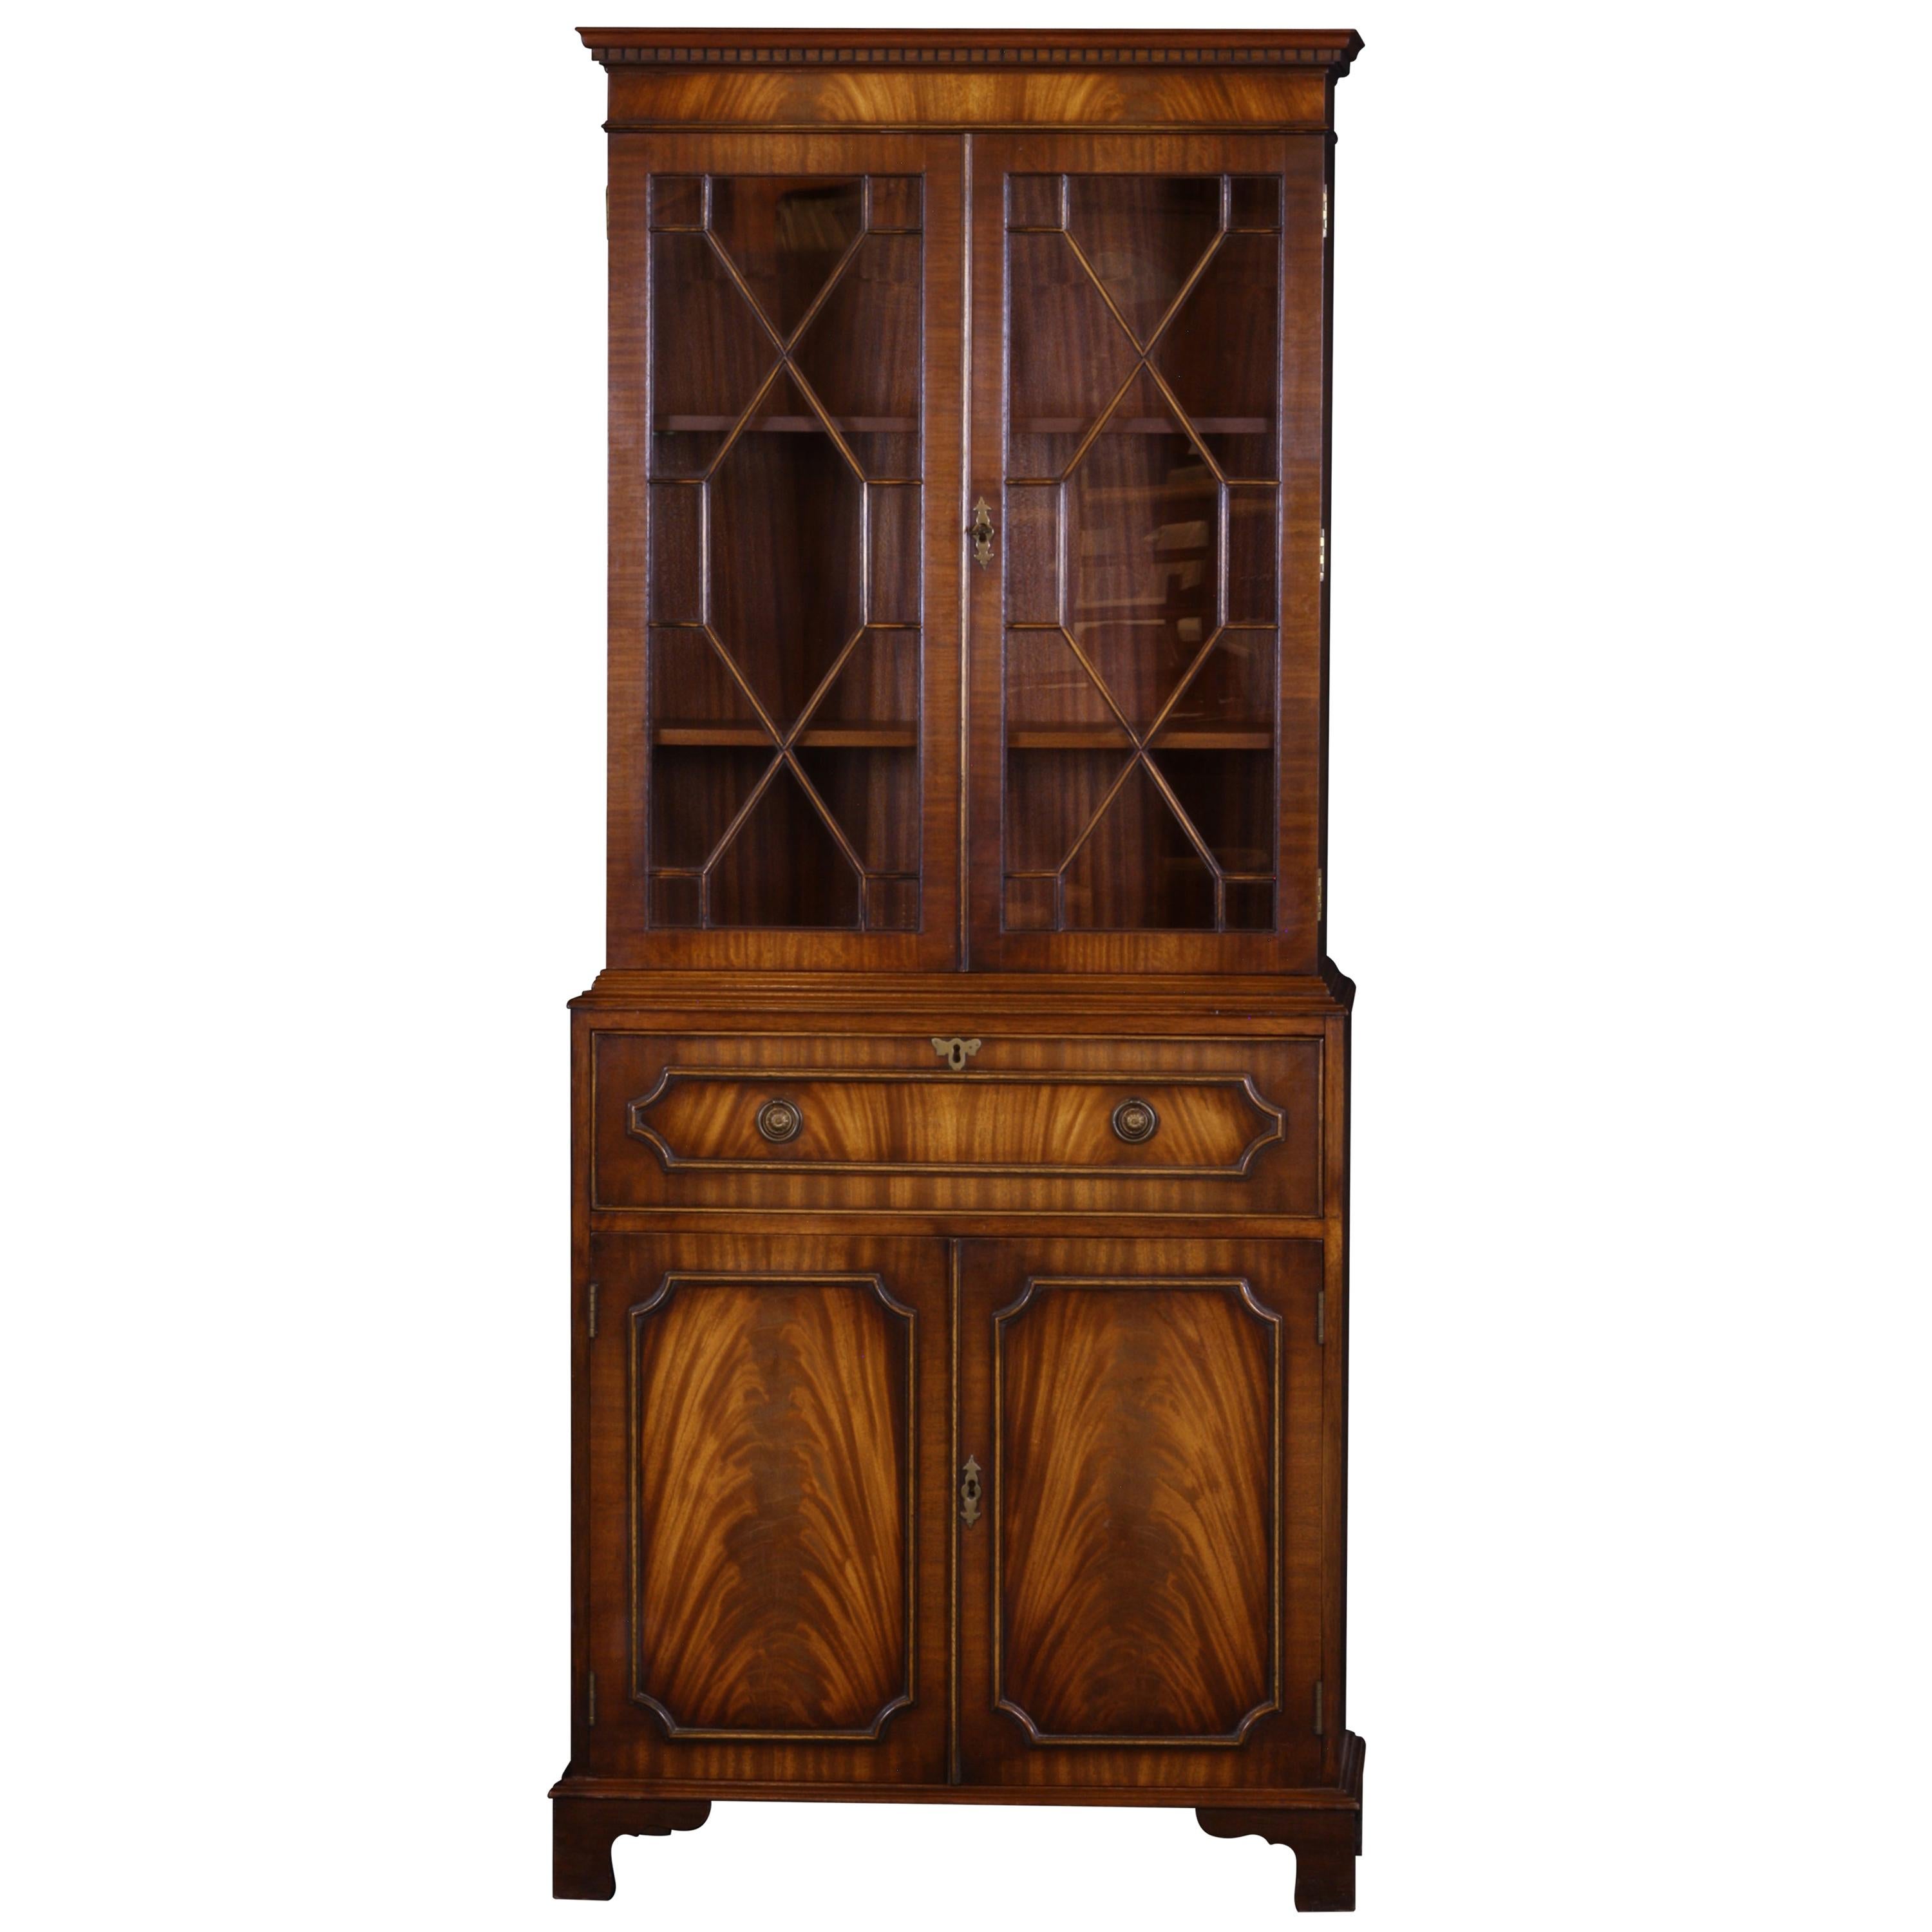 English Georgian Styling Bookcase with Secretary Desk Mahogany with Fitted Desk